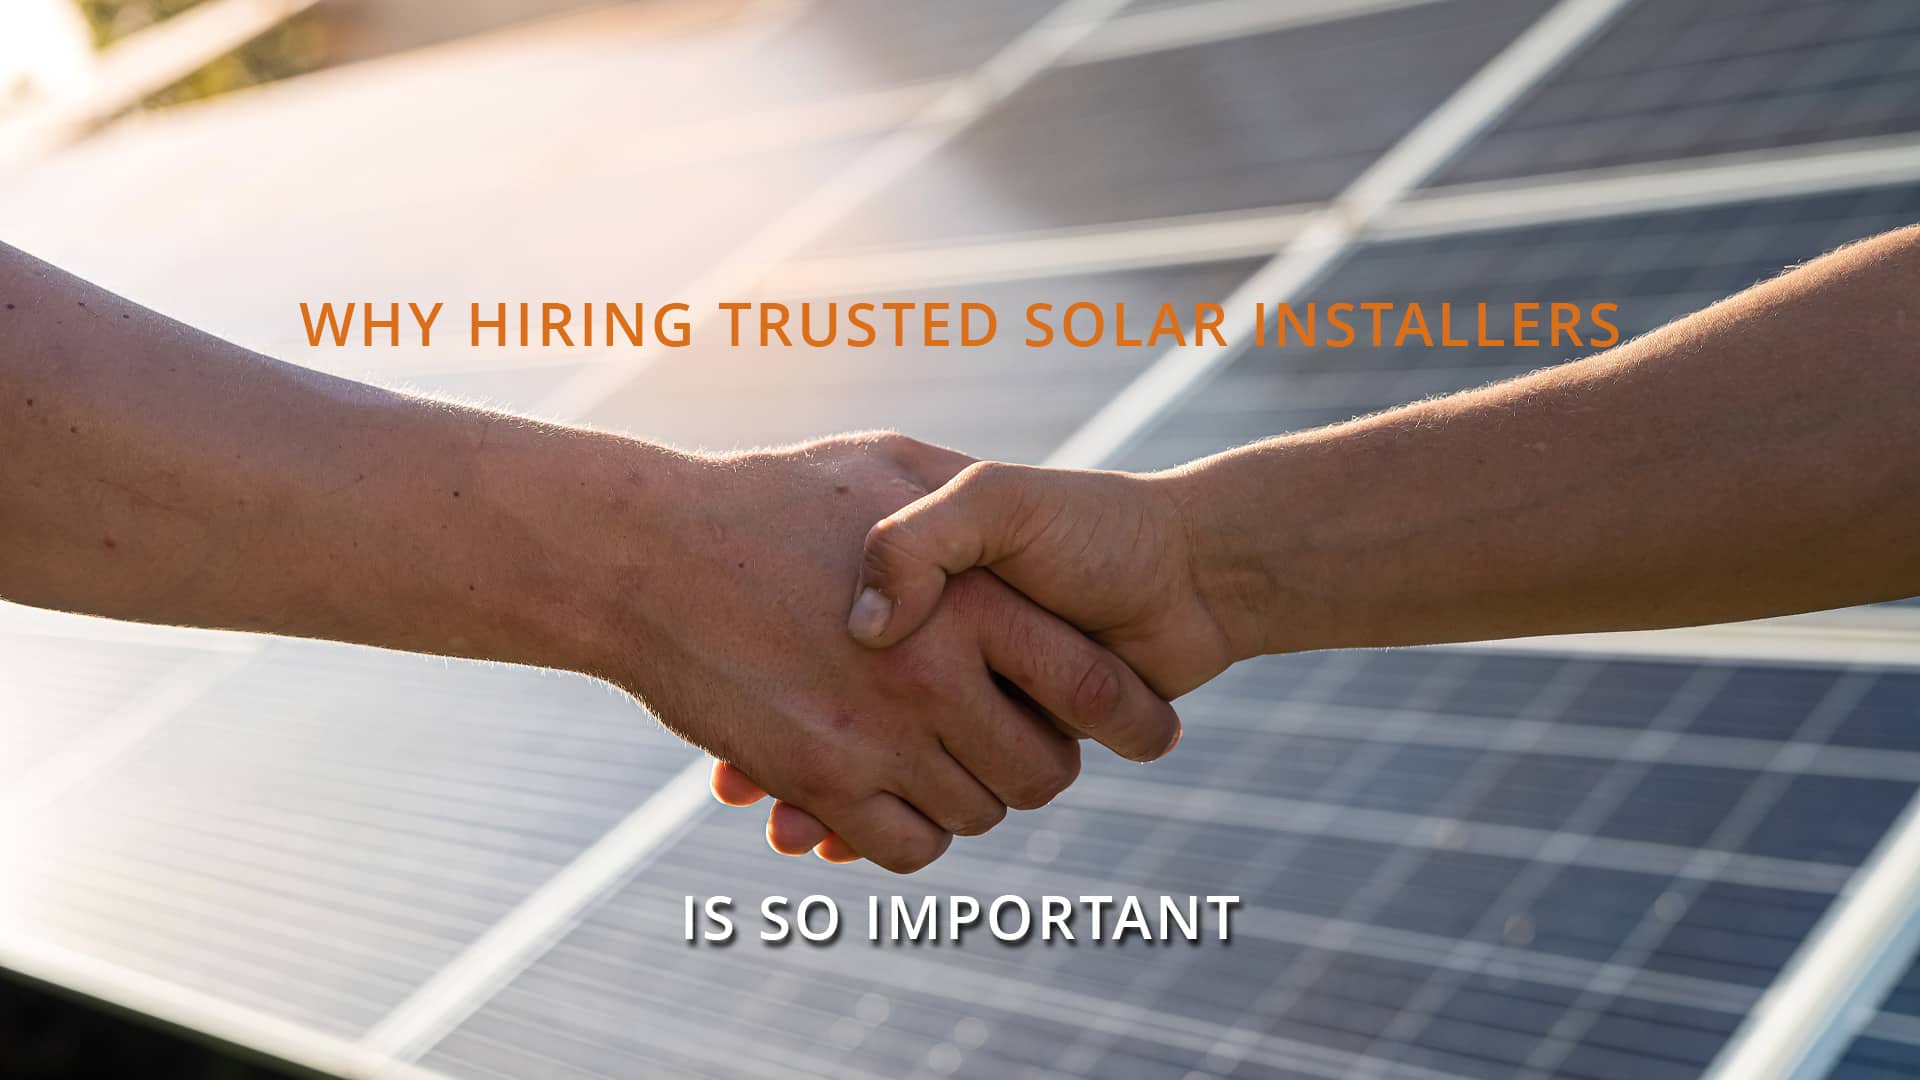 Why Hiring Trusted Solar Installers is so Important